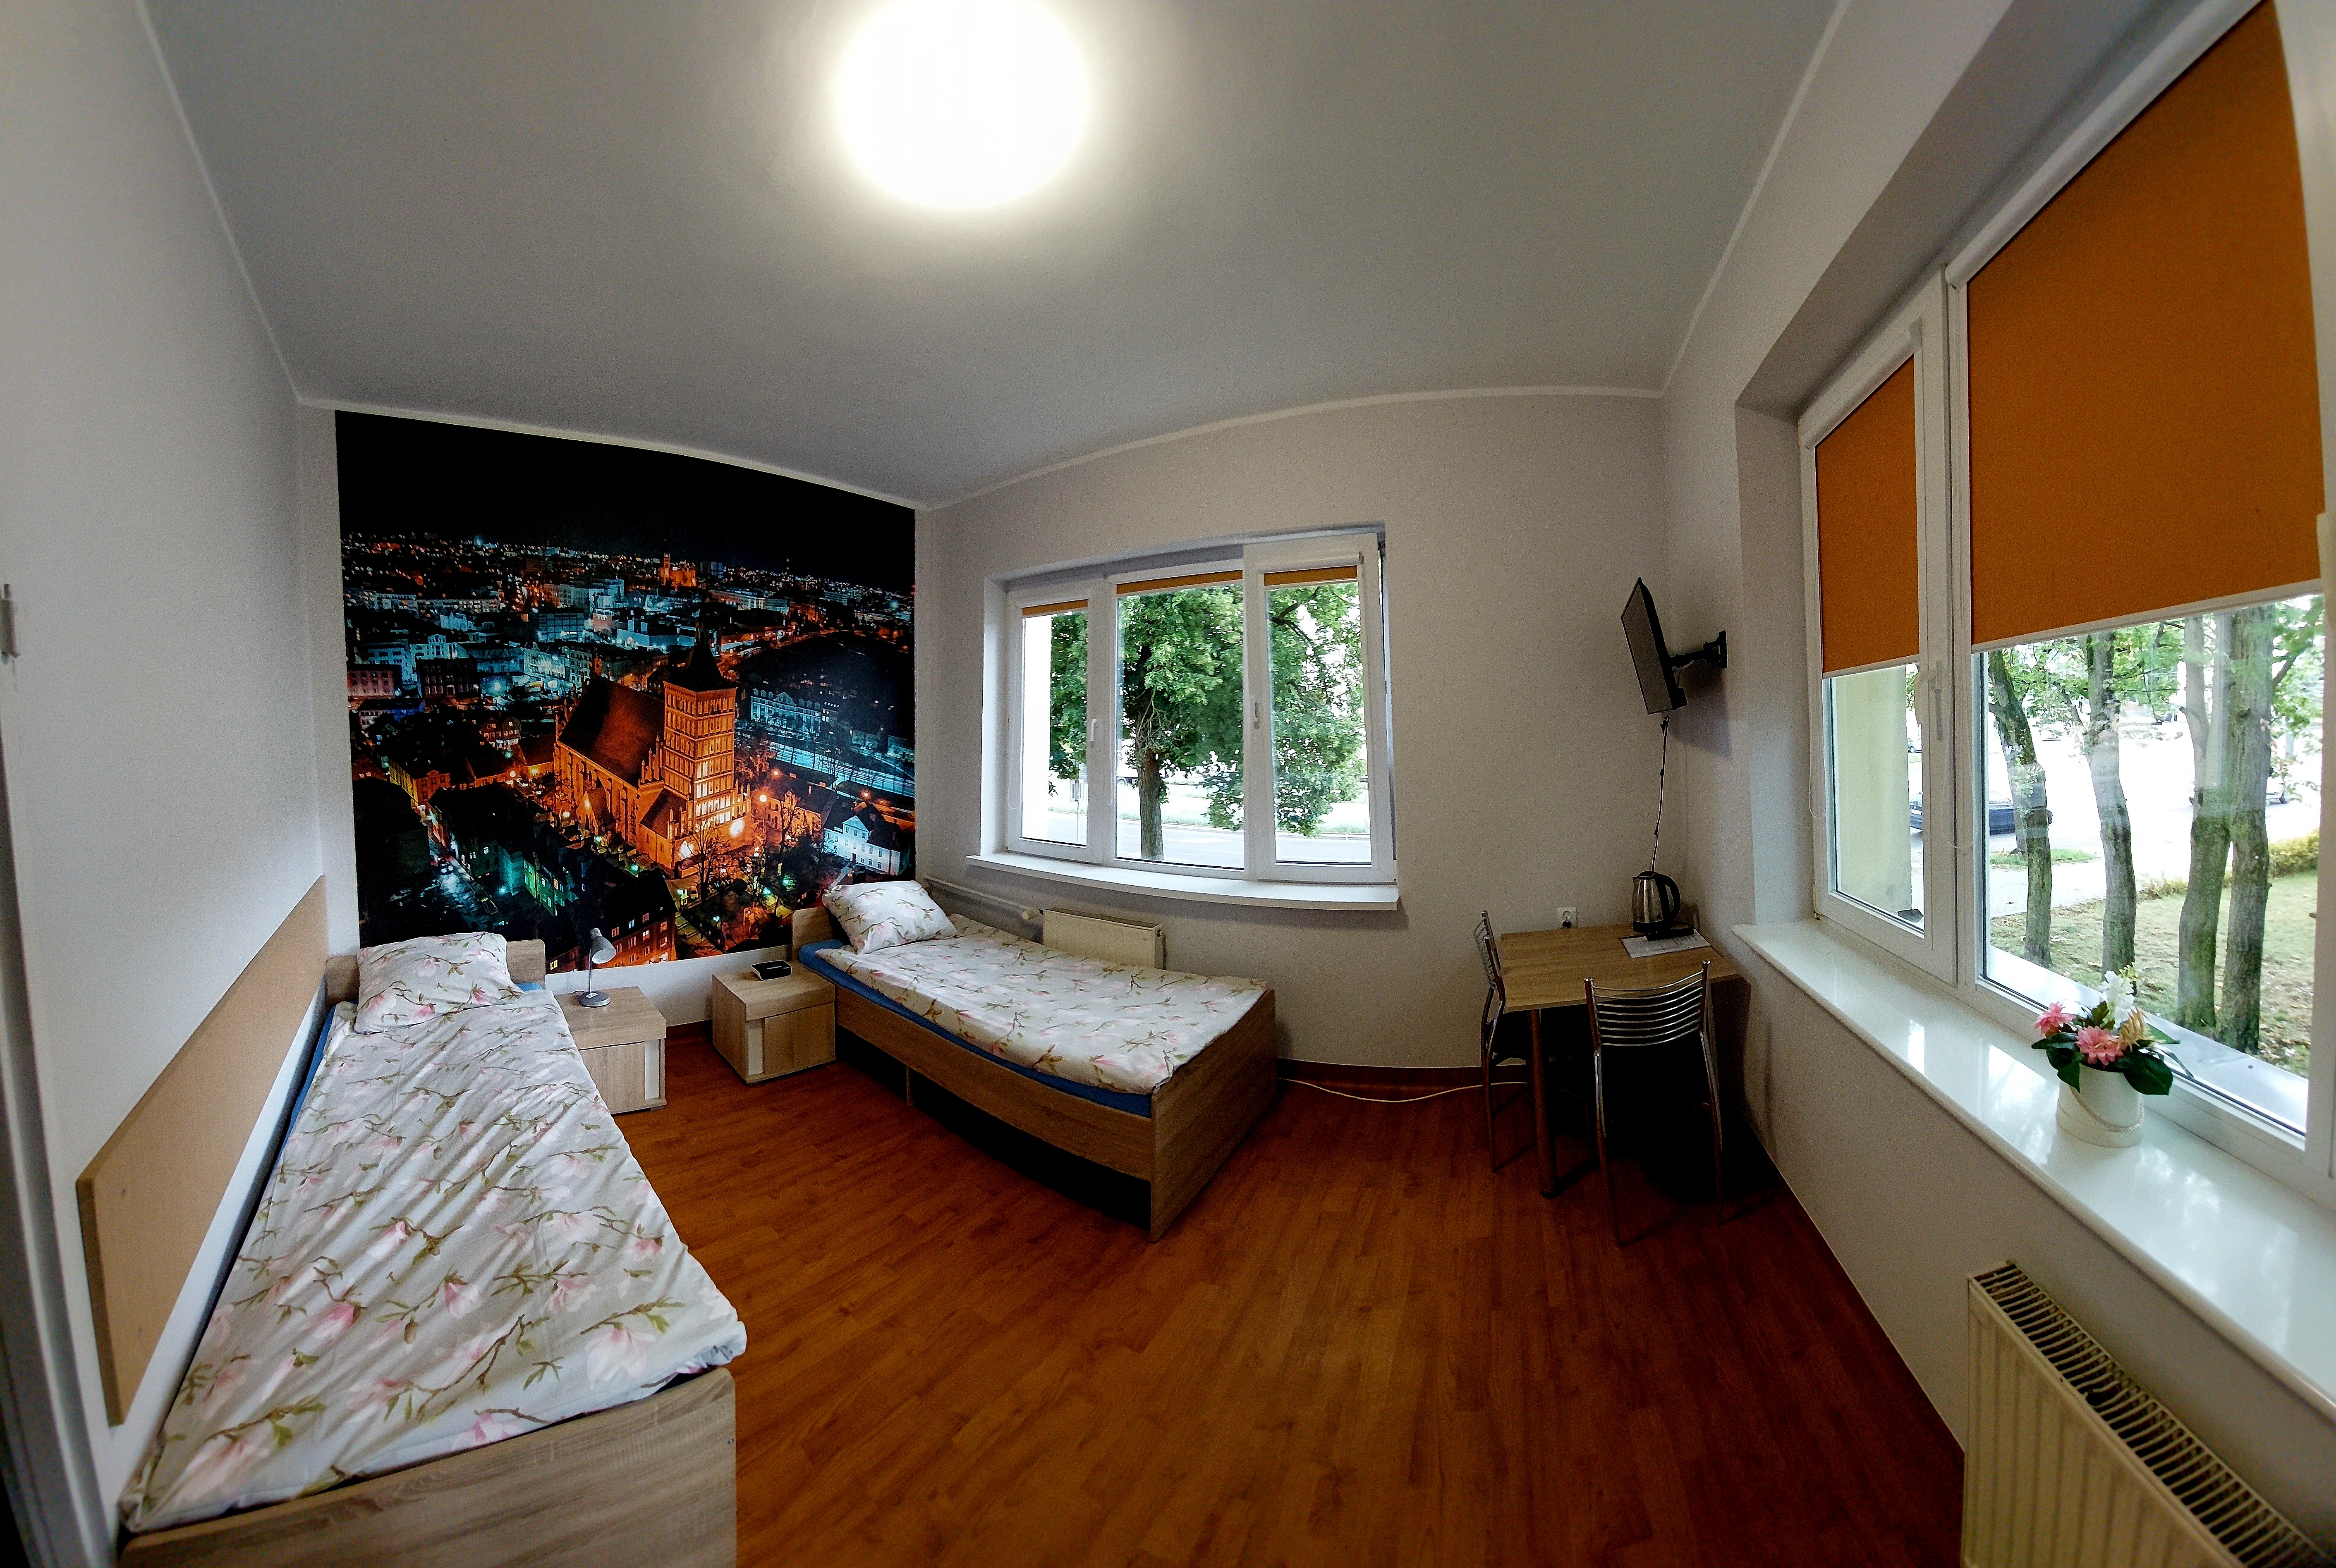 A double room with a bathroom in the facility No. 1 Kosciuszko. In the background on the wall wallpaper showing Olsztyn from a bird's eye view.  